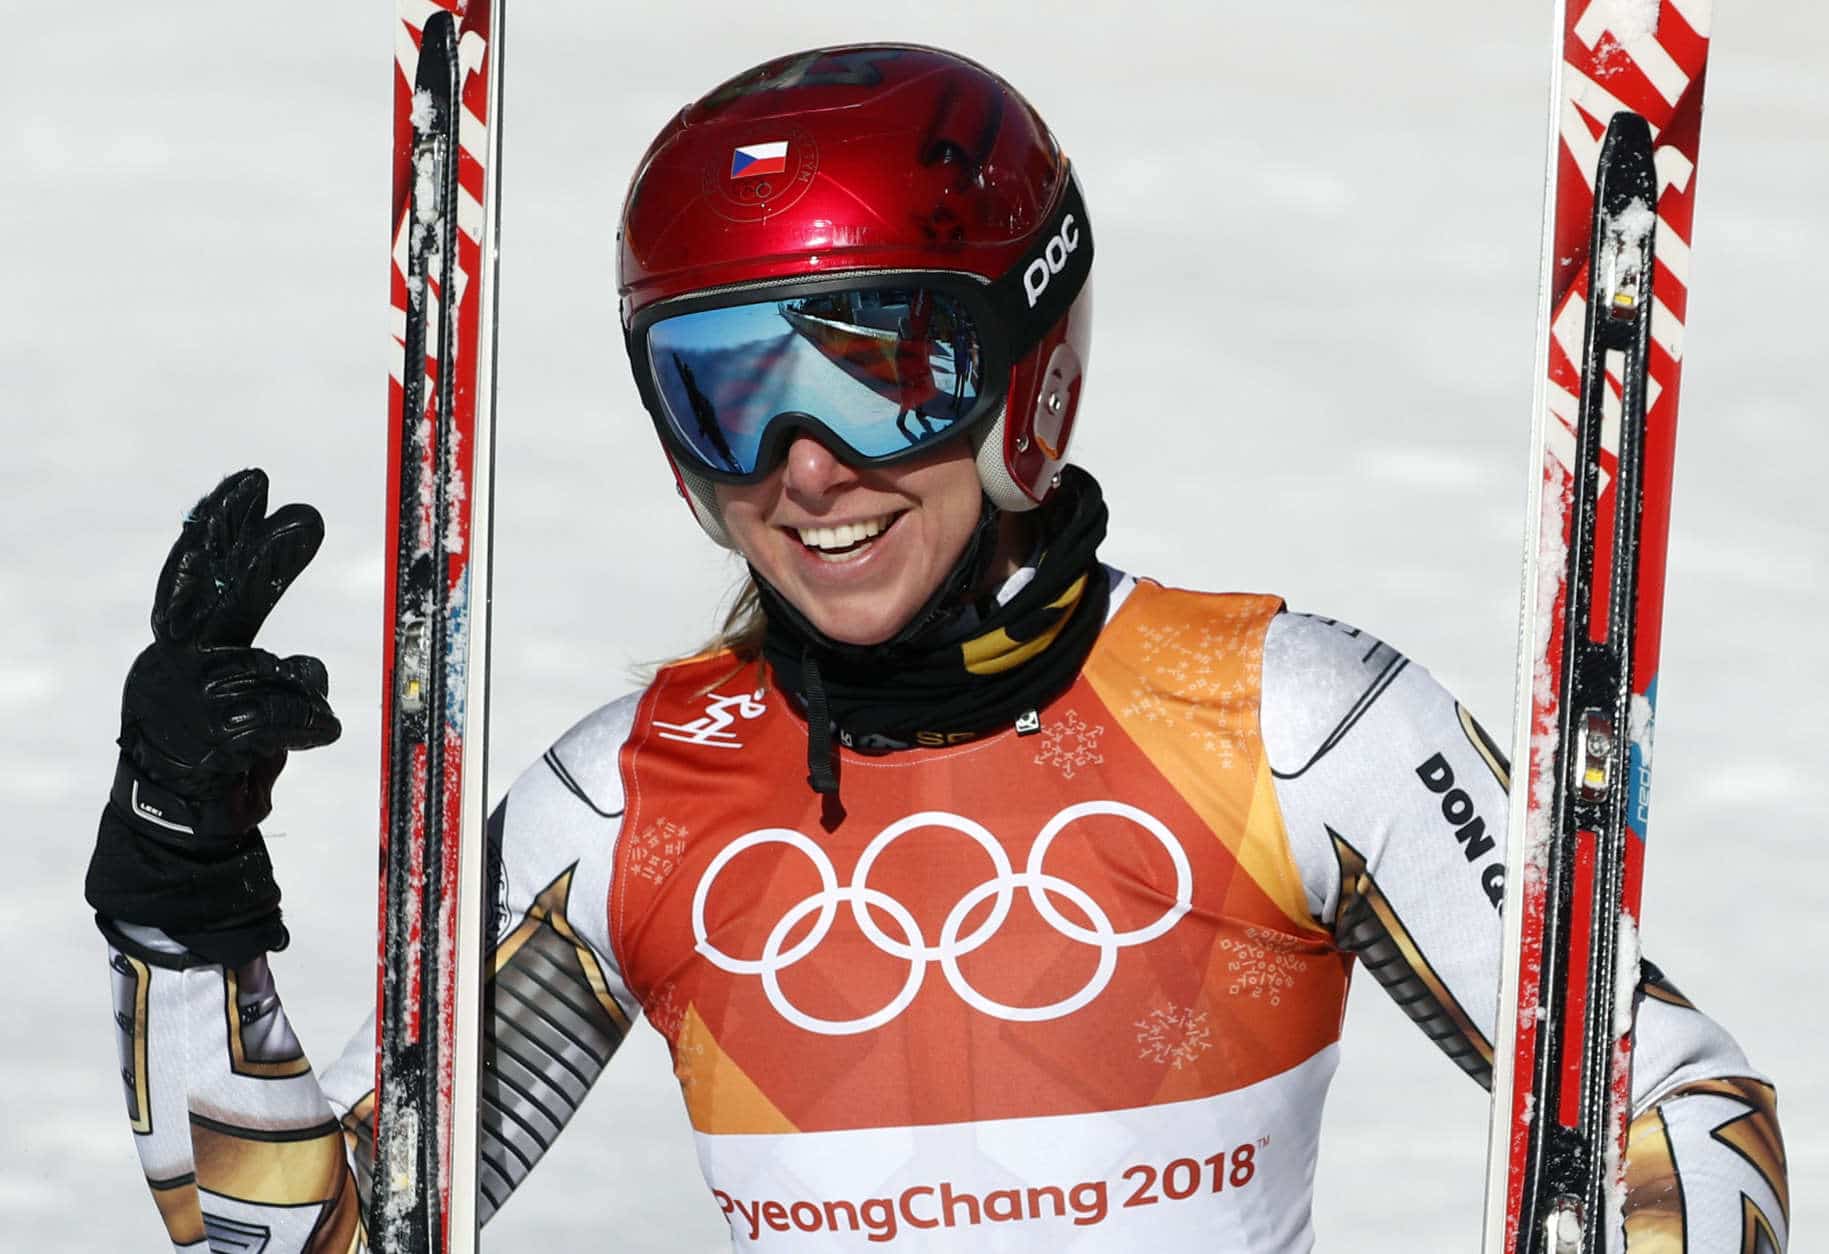 Czech Republic's Ester Ledecka reacts after competing in the women's super-G at the 2018 Winter Olympics in Jeongseon, South Korea, Saturday, Feb. 17, 2018. (AP Photo/Christophe Ena)